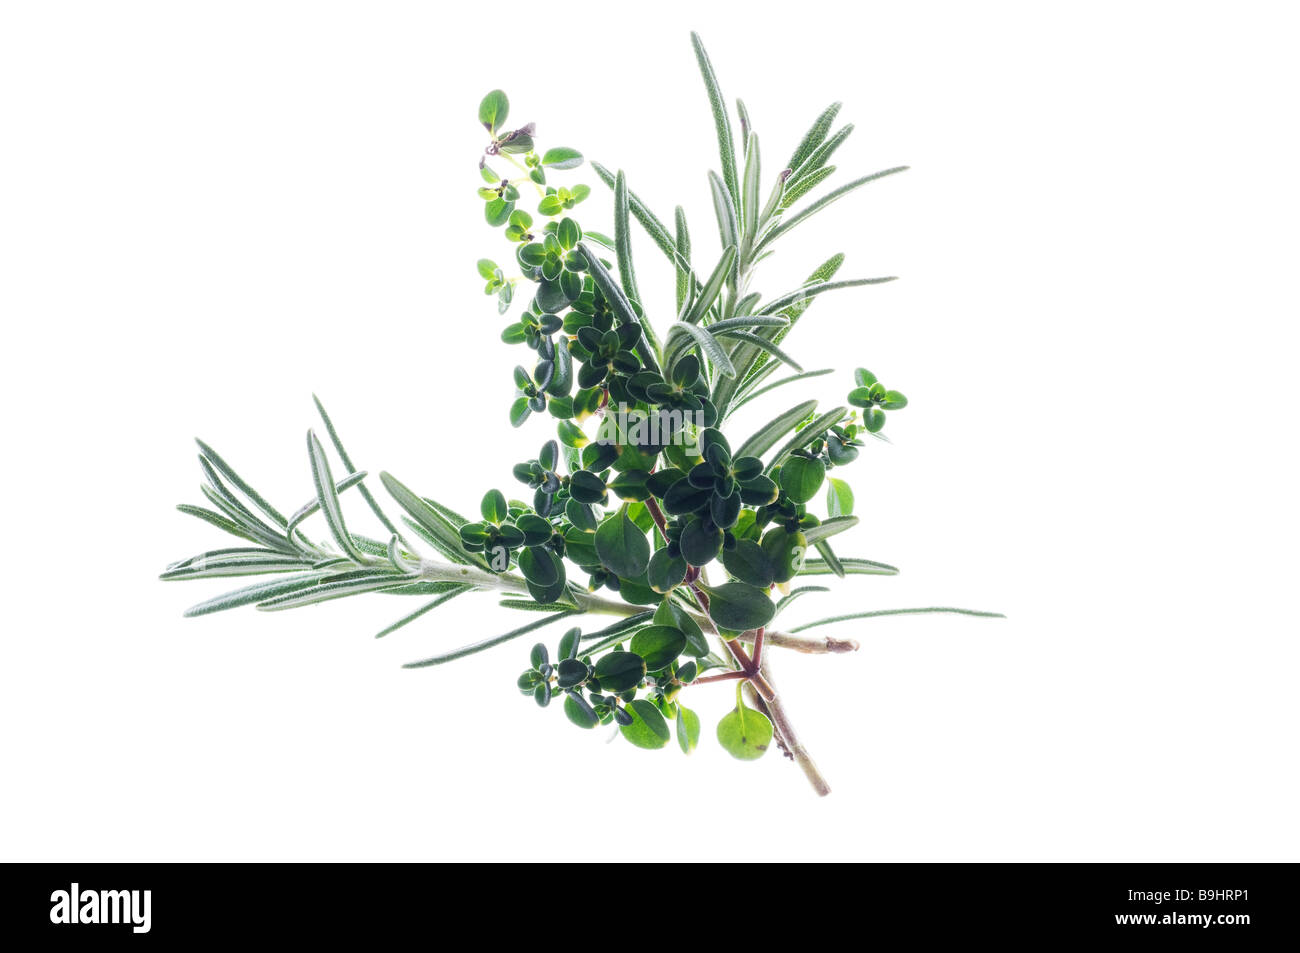 Herbal bouquet with Rosemary (Rosmarinus officinalis) and Thyme (Thymus) Stock Photo